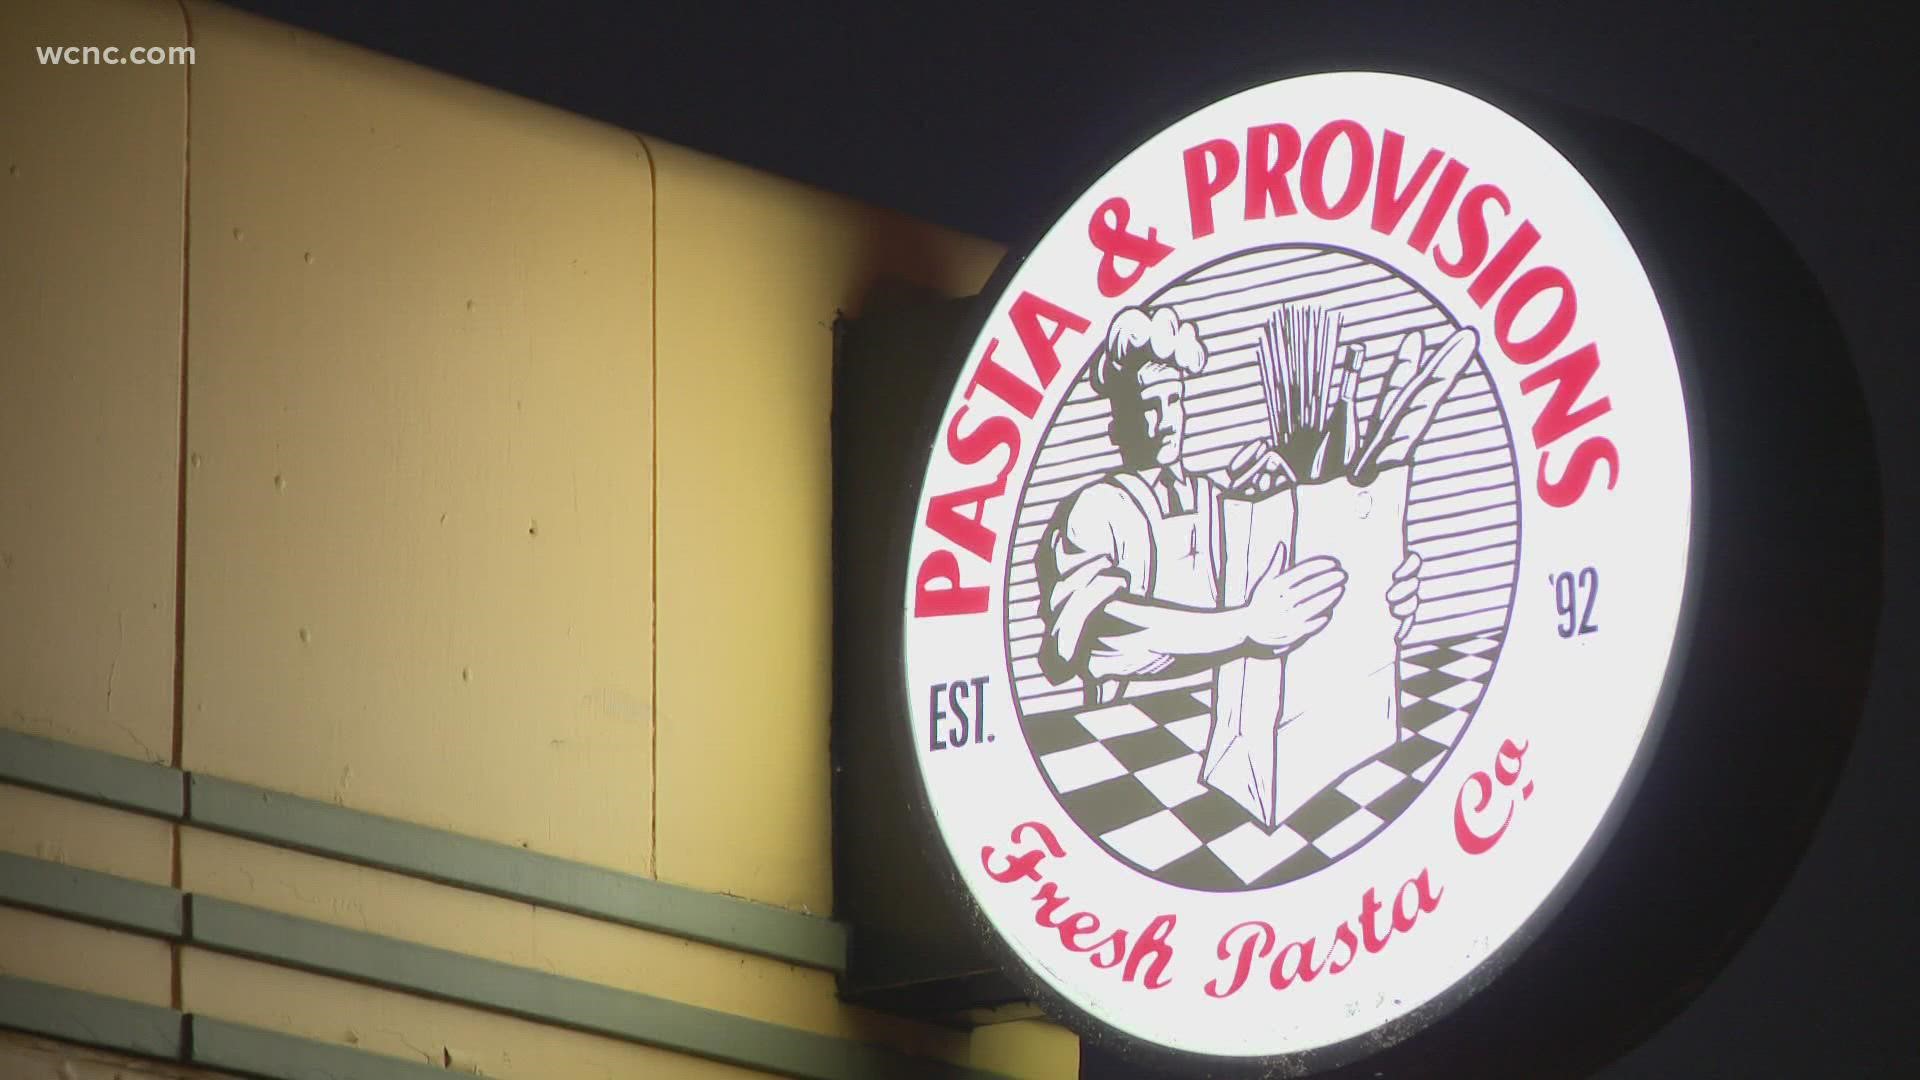 After spending many months weighing their options management at Pasta & Provisions said they had no other choice but to increase their own prices as well.